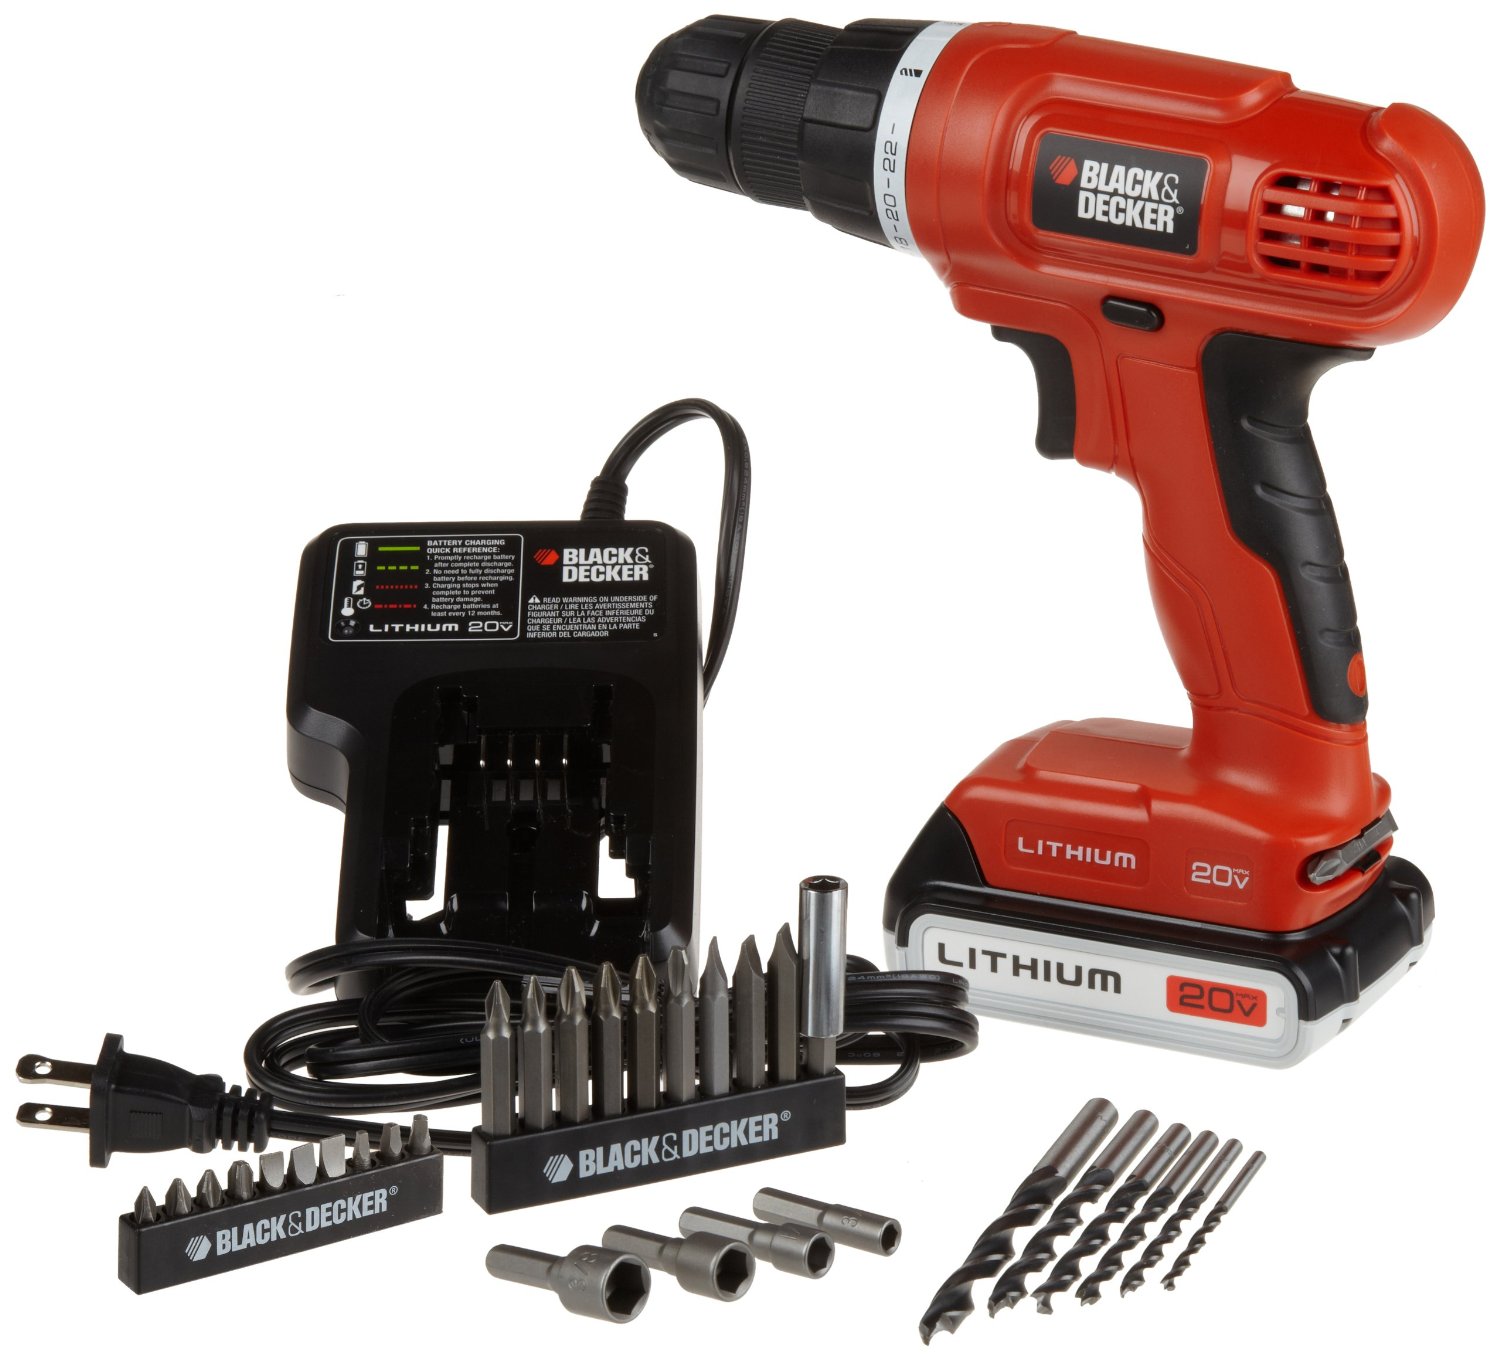 Top 10 Best Cordless Drills 2017 Top Value Reviews